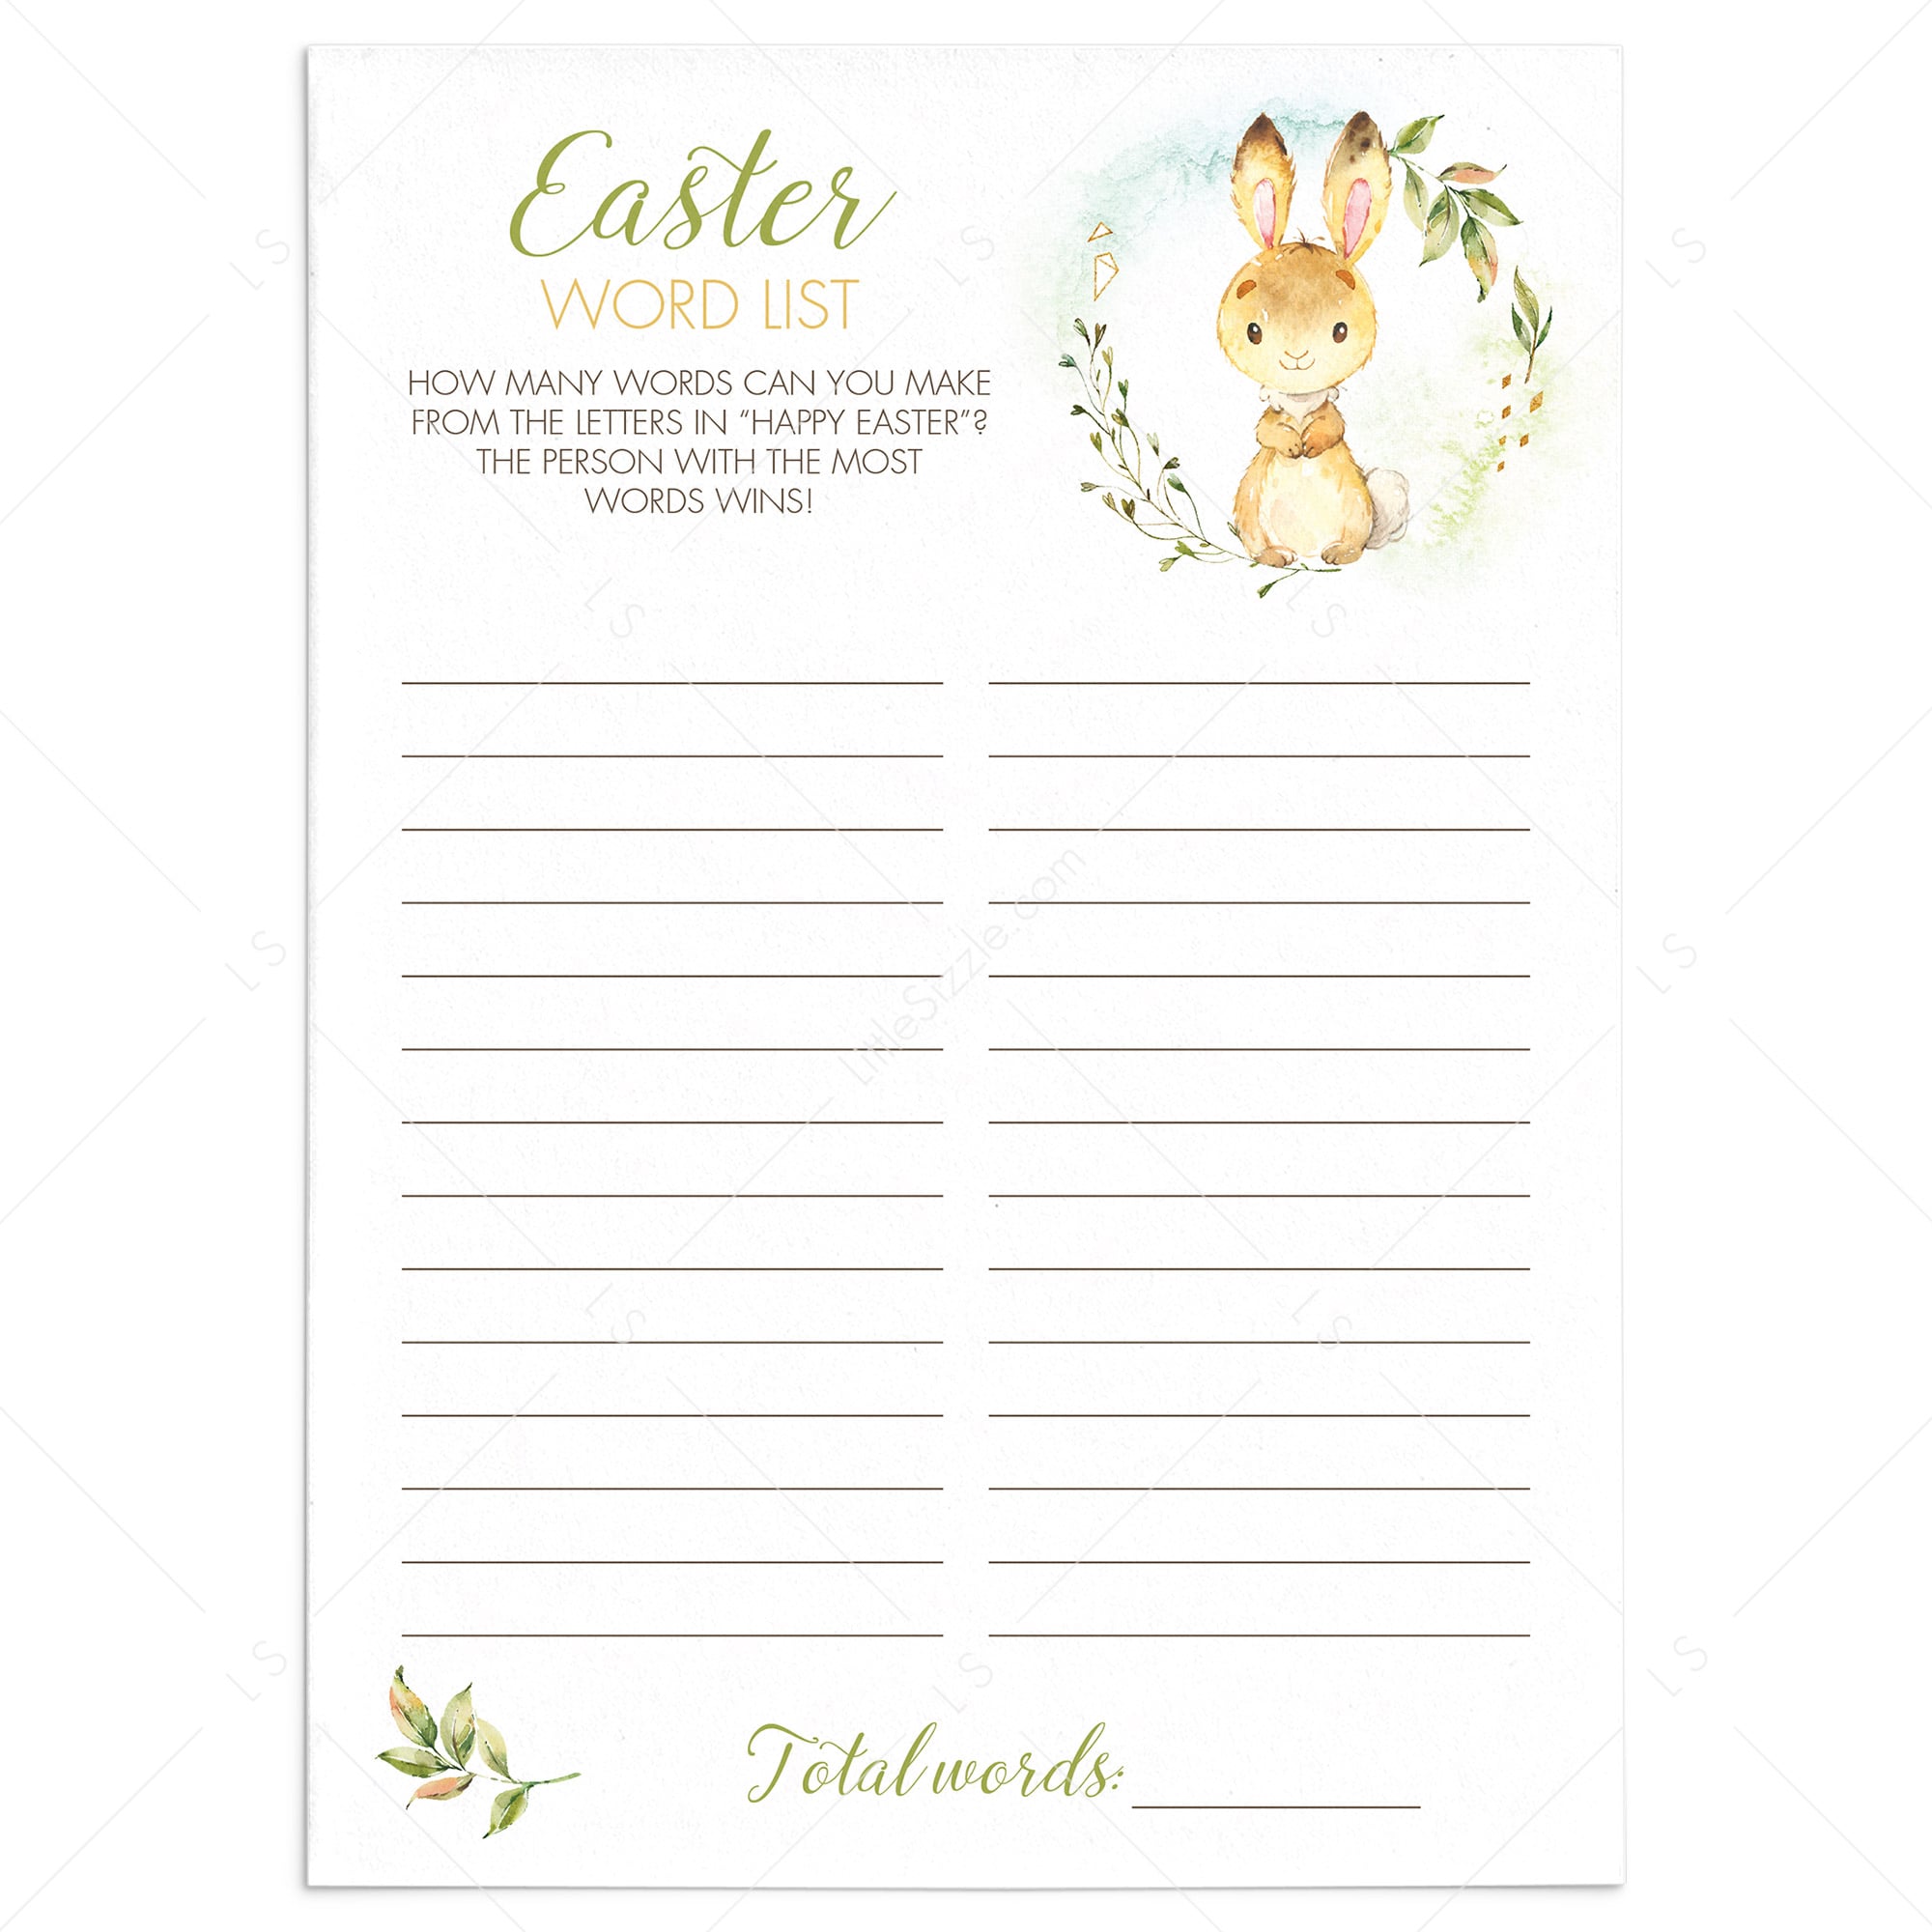 Happy Easter Word List Game Printable & Virtual by LittleSizzle